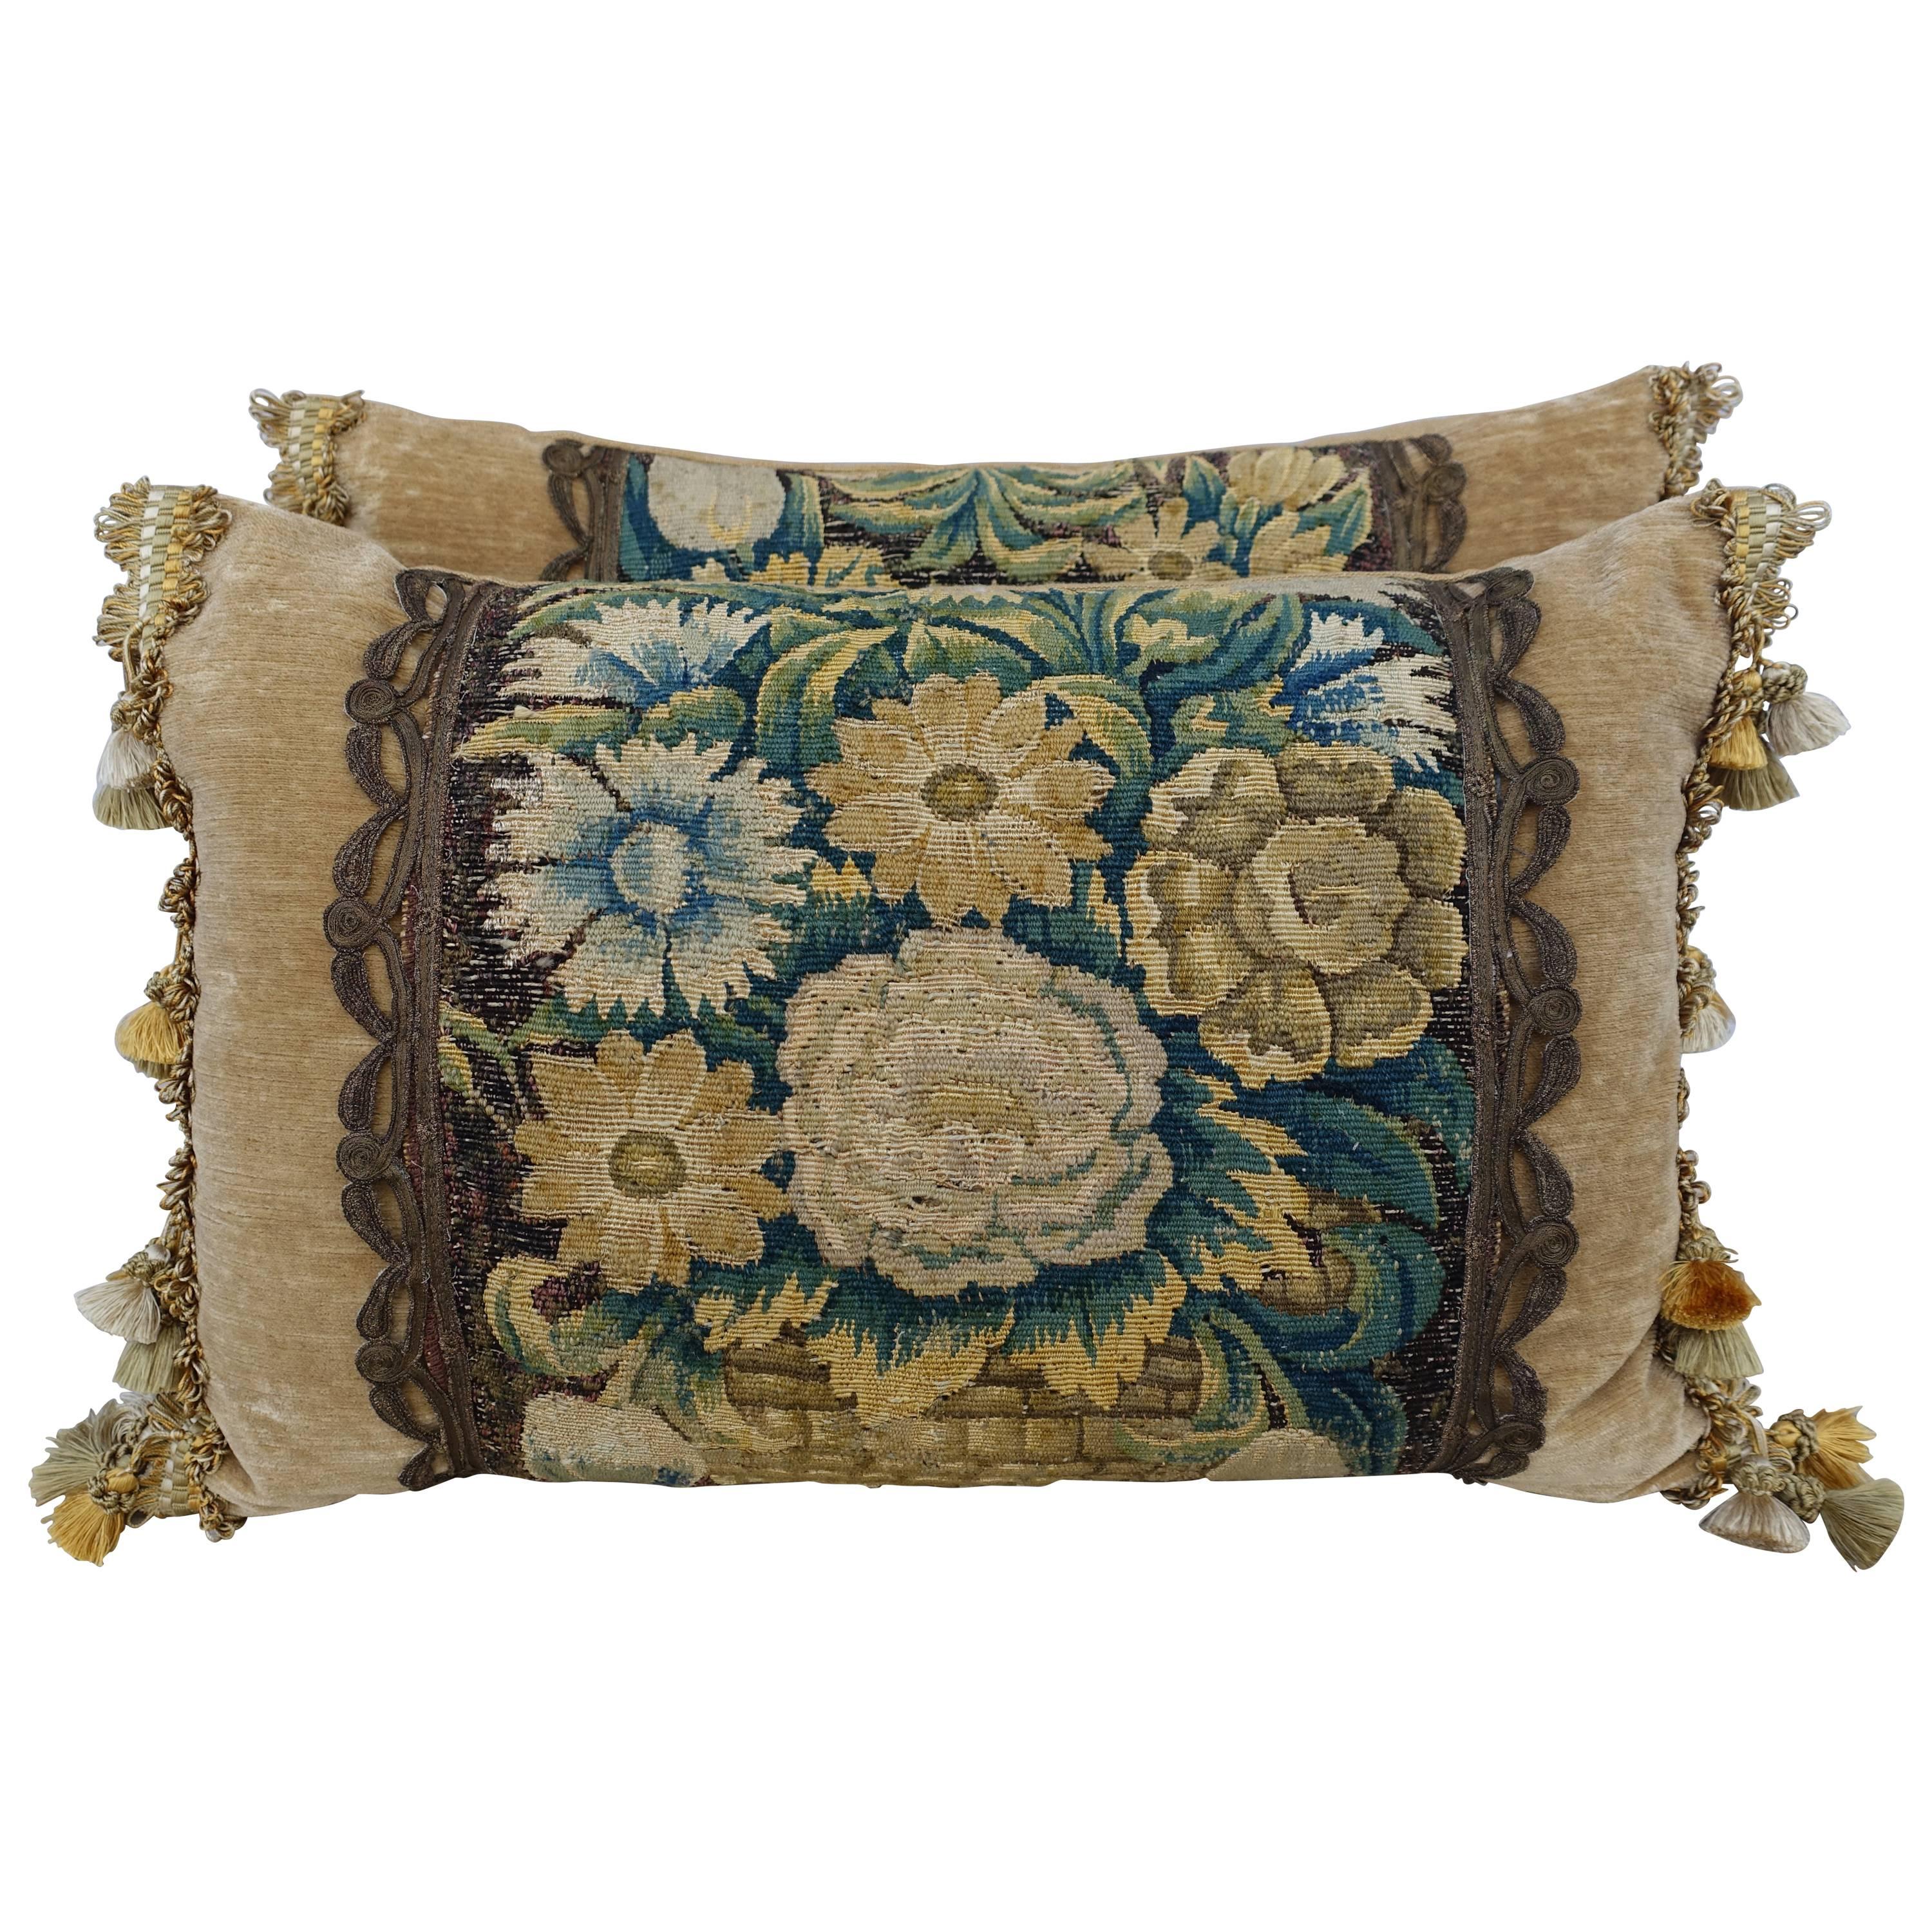 17th Century Flemish Tapestry Pillows by Melissa Levinson